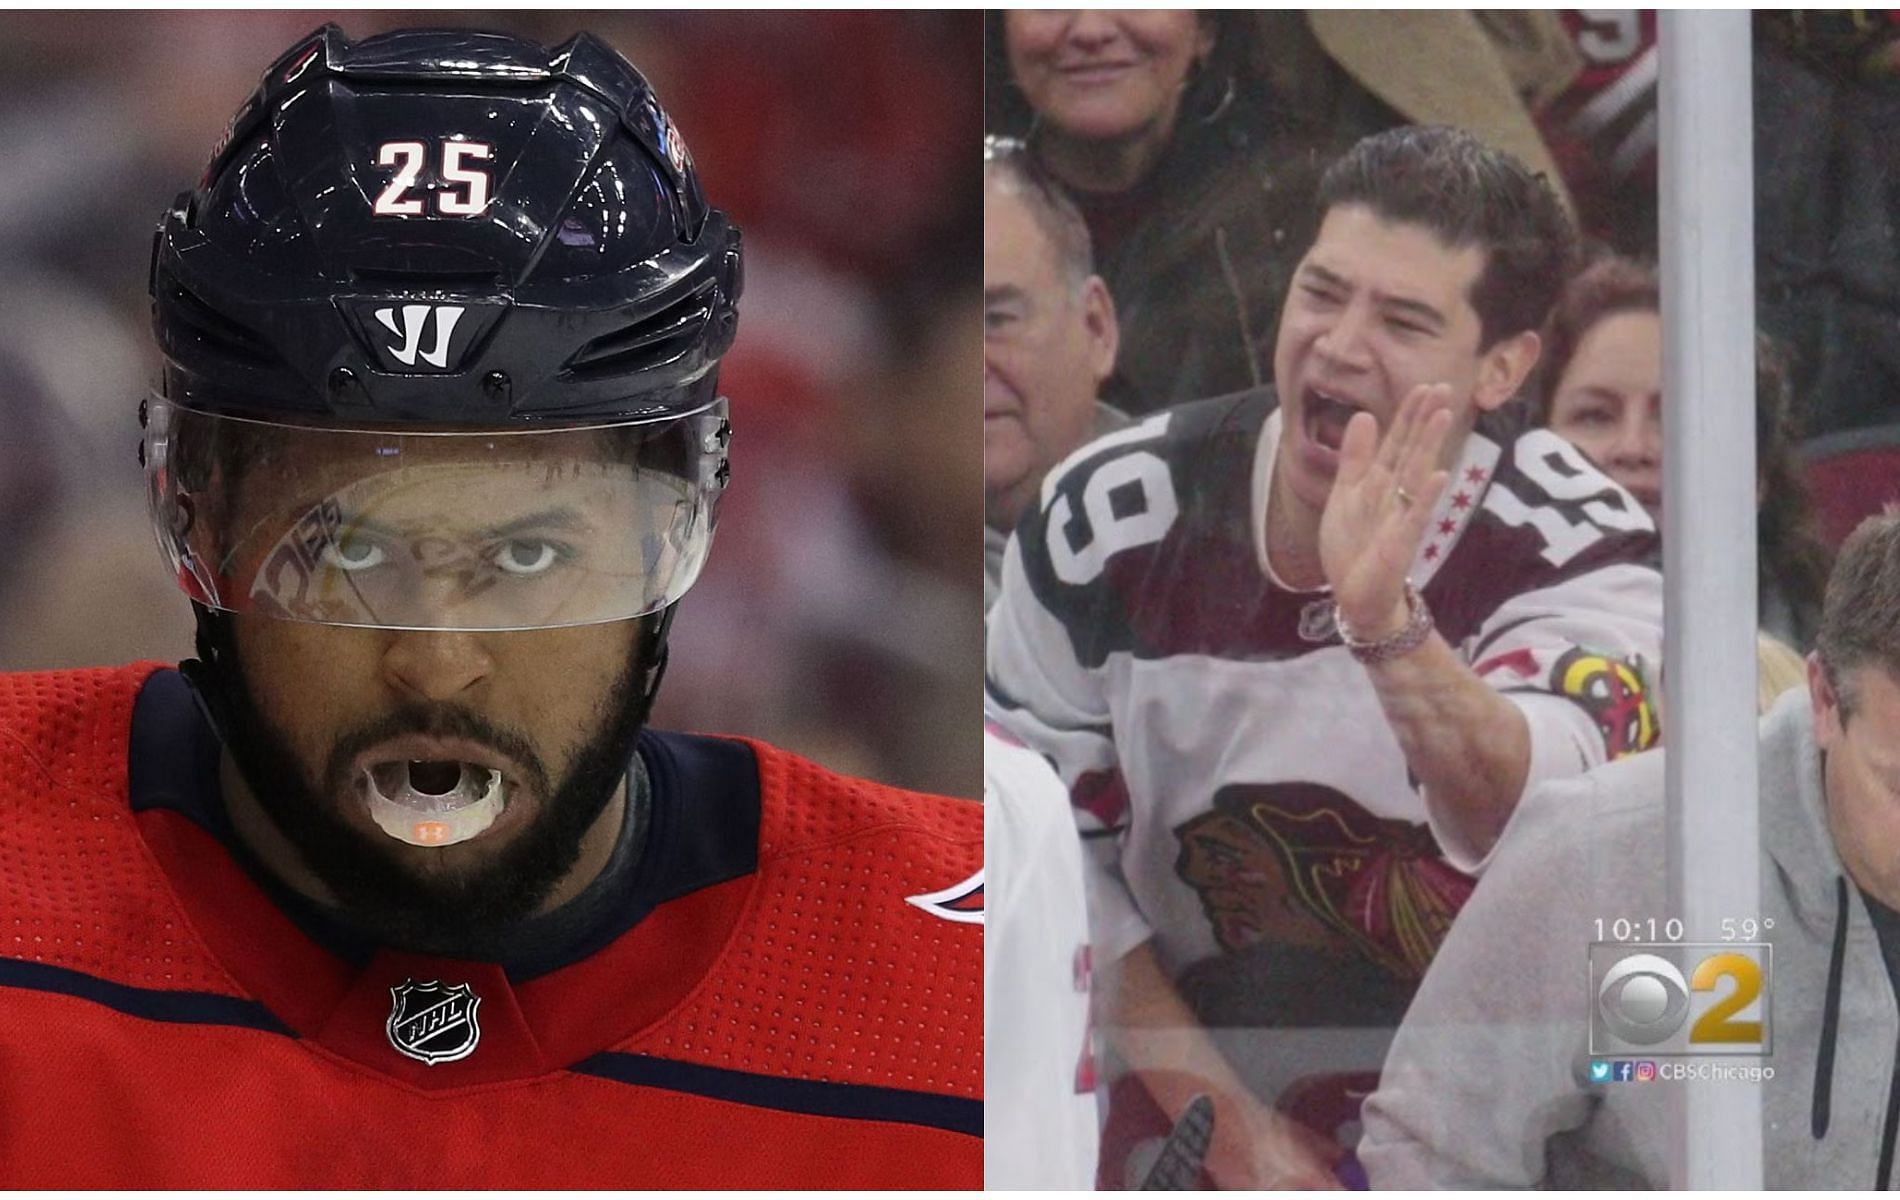 When Chicago Blackhawks fans were thrown out for hurling racist abuses at Devante Smith-Pelly